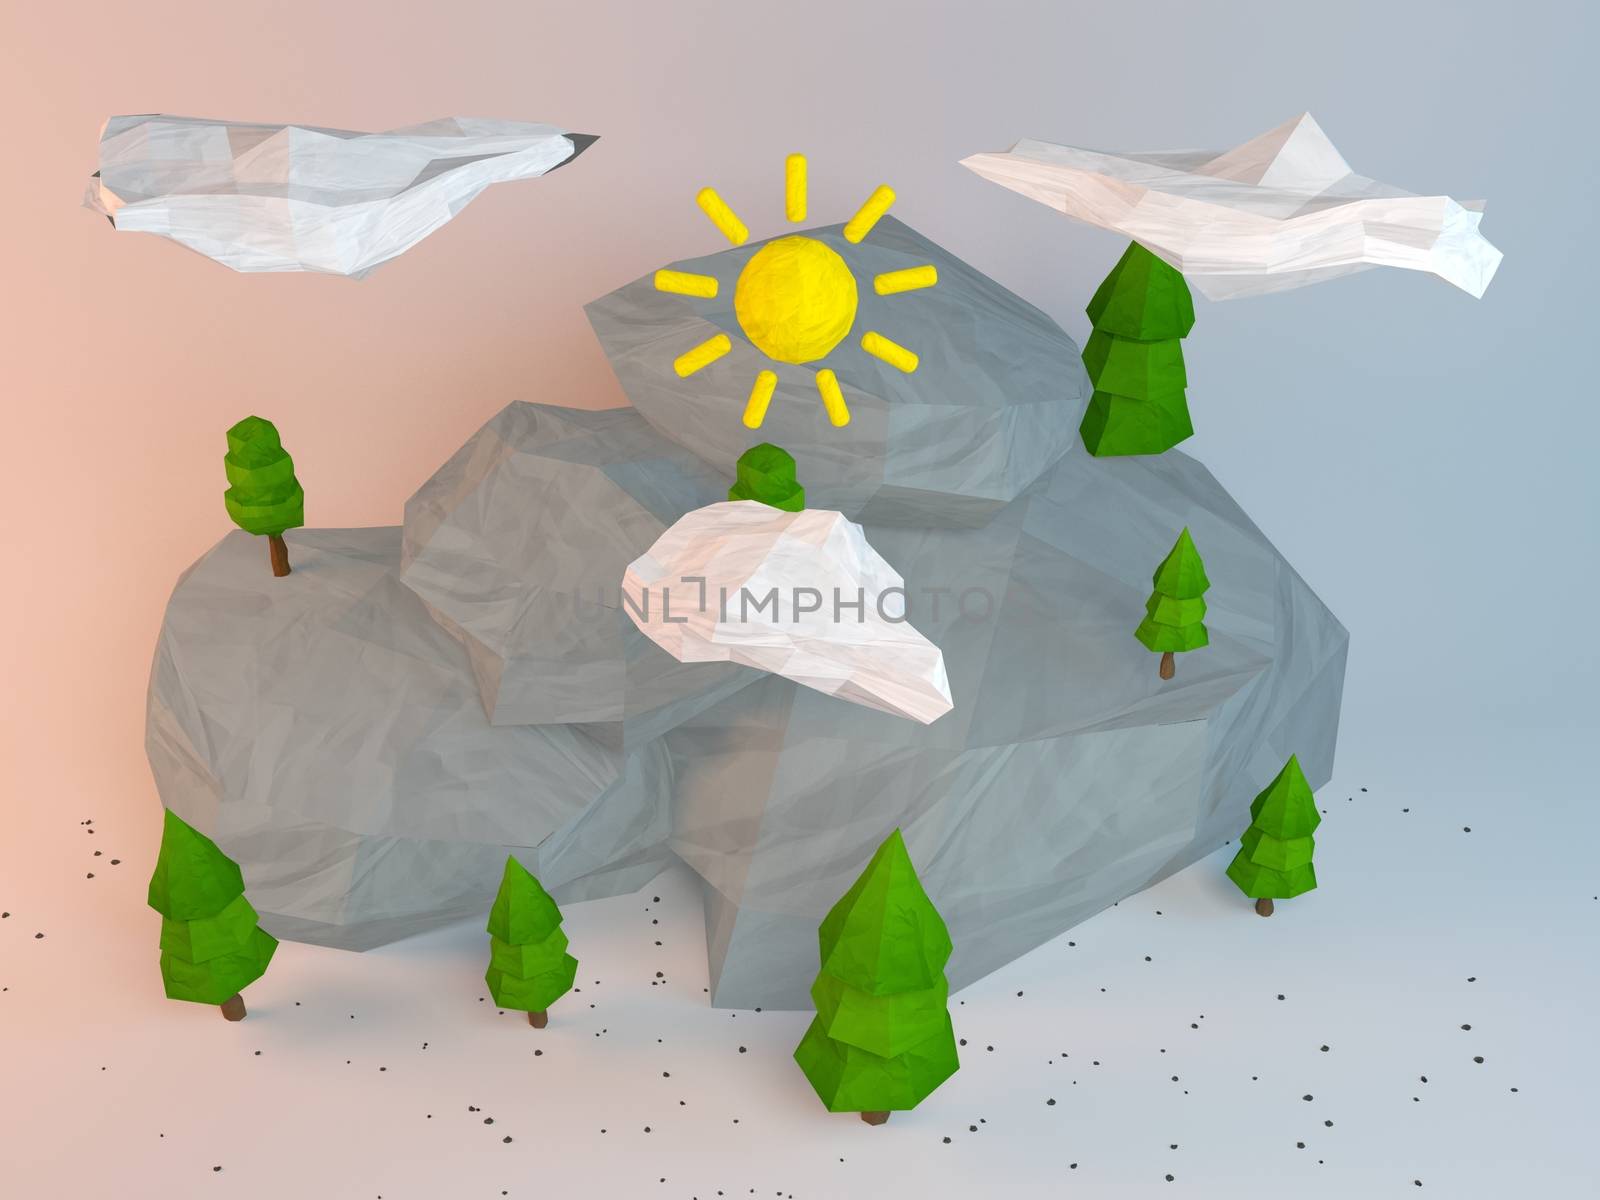 3d rendering of low poly stylized trees and rocks. Objects in the spot of soft light. Colorful cartoon geometric elements with realistic shadows on white background. 